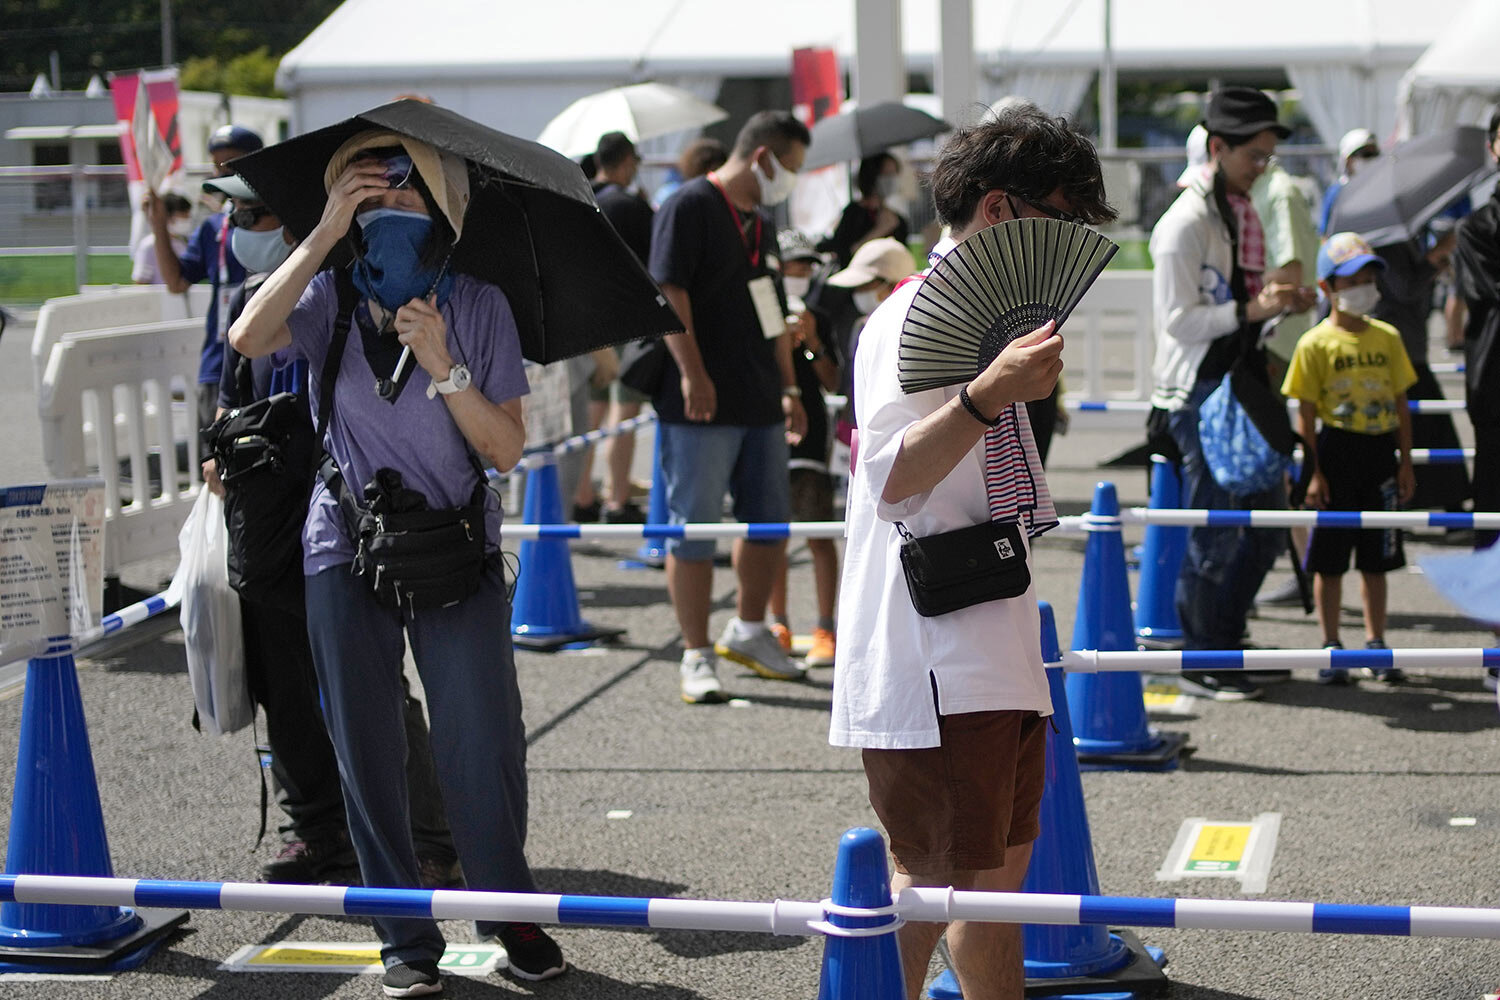  Visitors use fans and umbrellas in the heat outside the Fuji International Speedway, the finish for the women's cycling road race that is underway, at the 2020 Summer Olympics, Sunday, July 25, 2021, in Oyama, Japan. (AP Photo/Christophe Ena) 